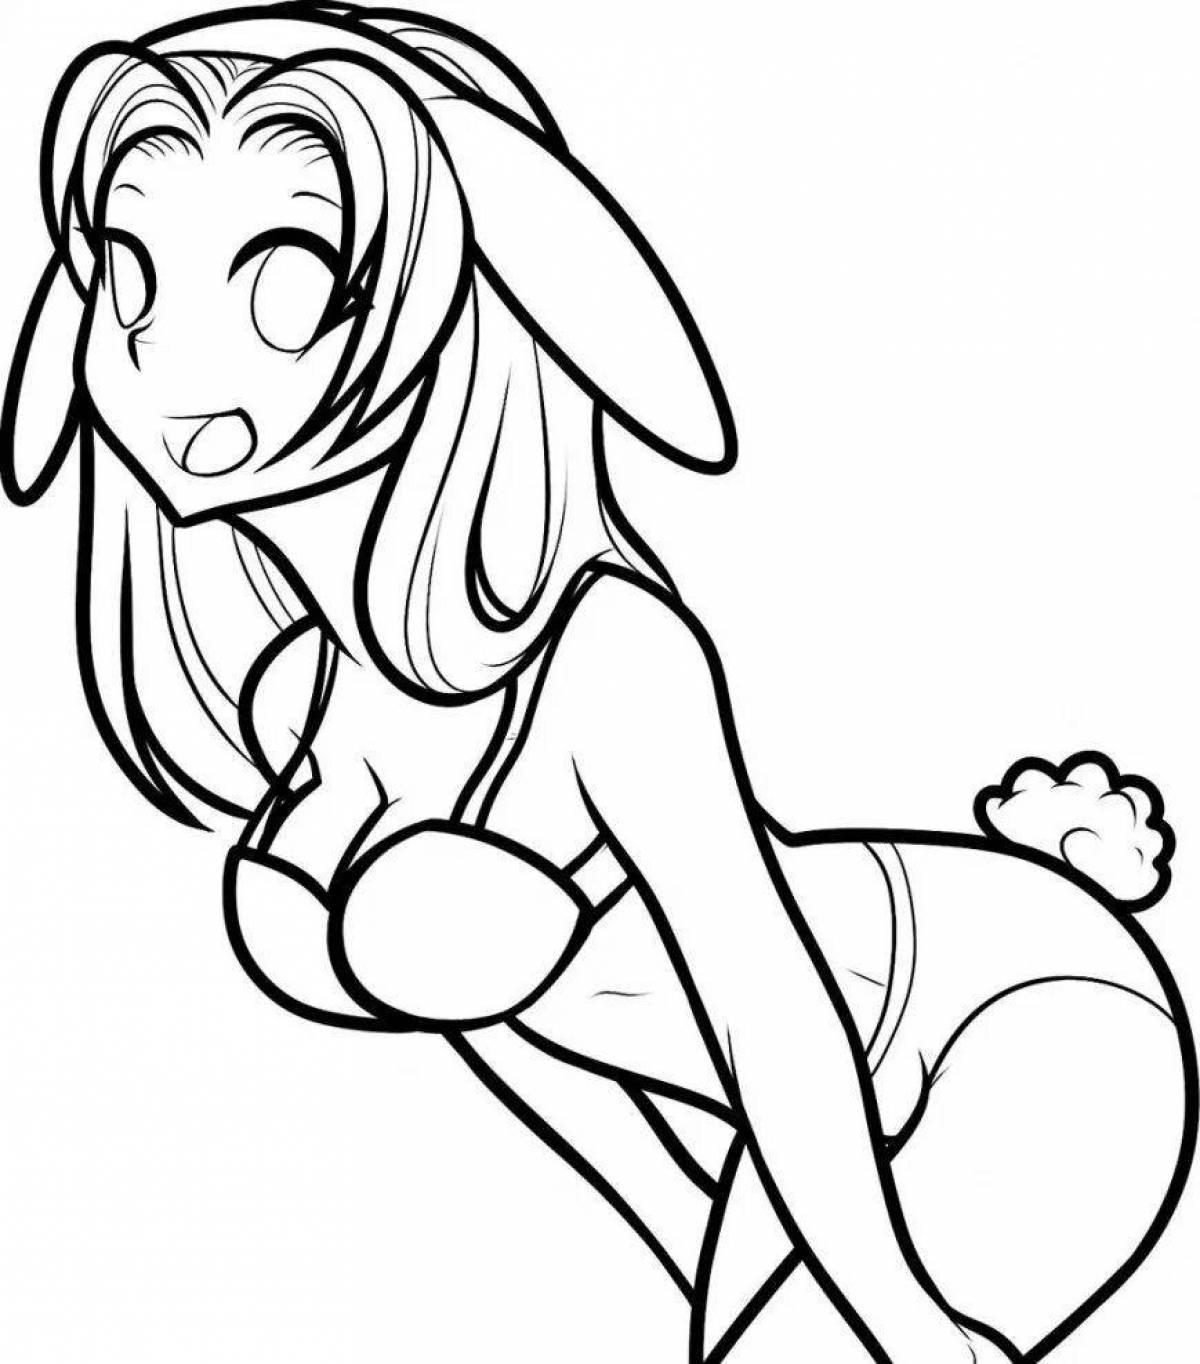 Funny anime bunny coloring book